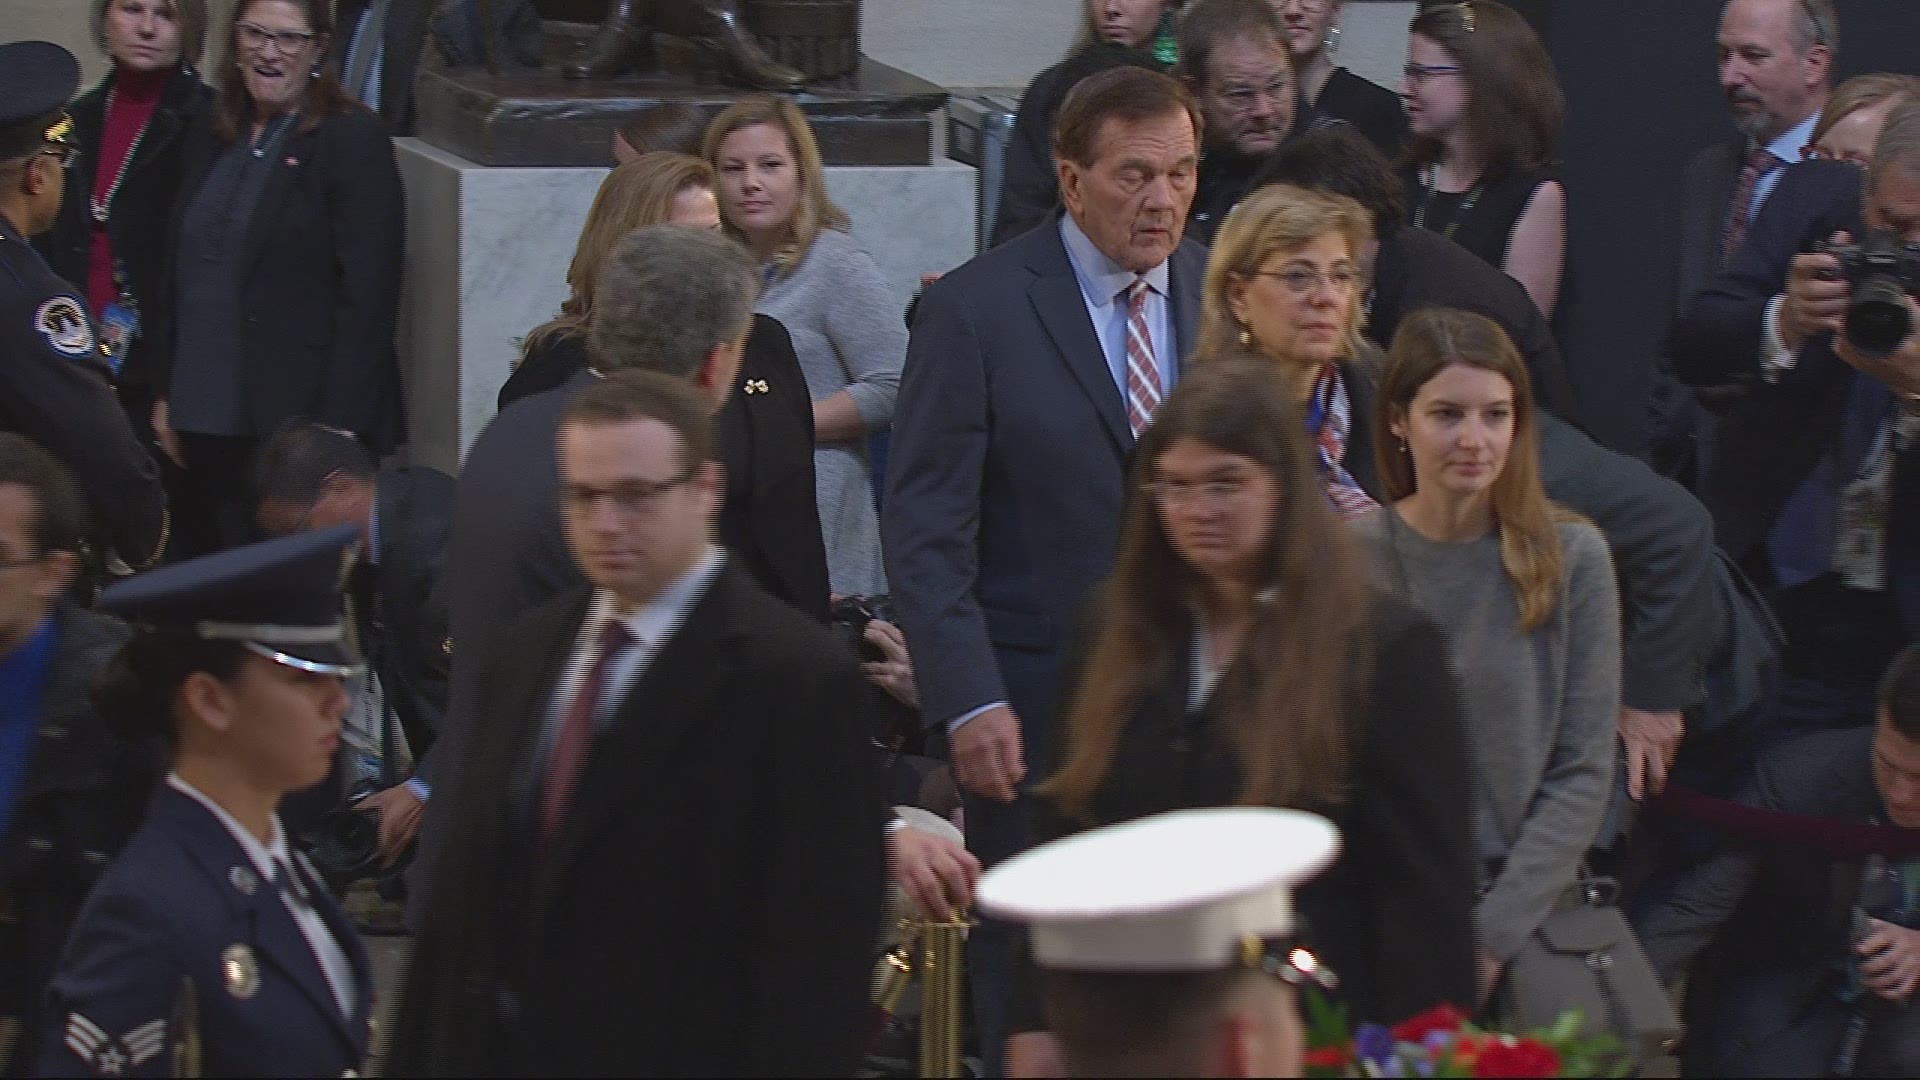 Former President George H.W. Bush's service dog joined those who paid respect and visited Bush's casket in the Capitol Rotunda Tuesday during a day of public viewing.